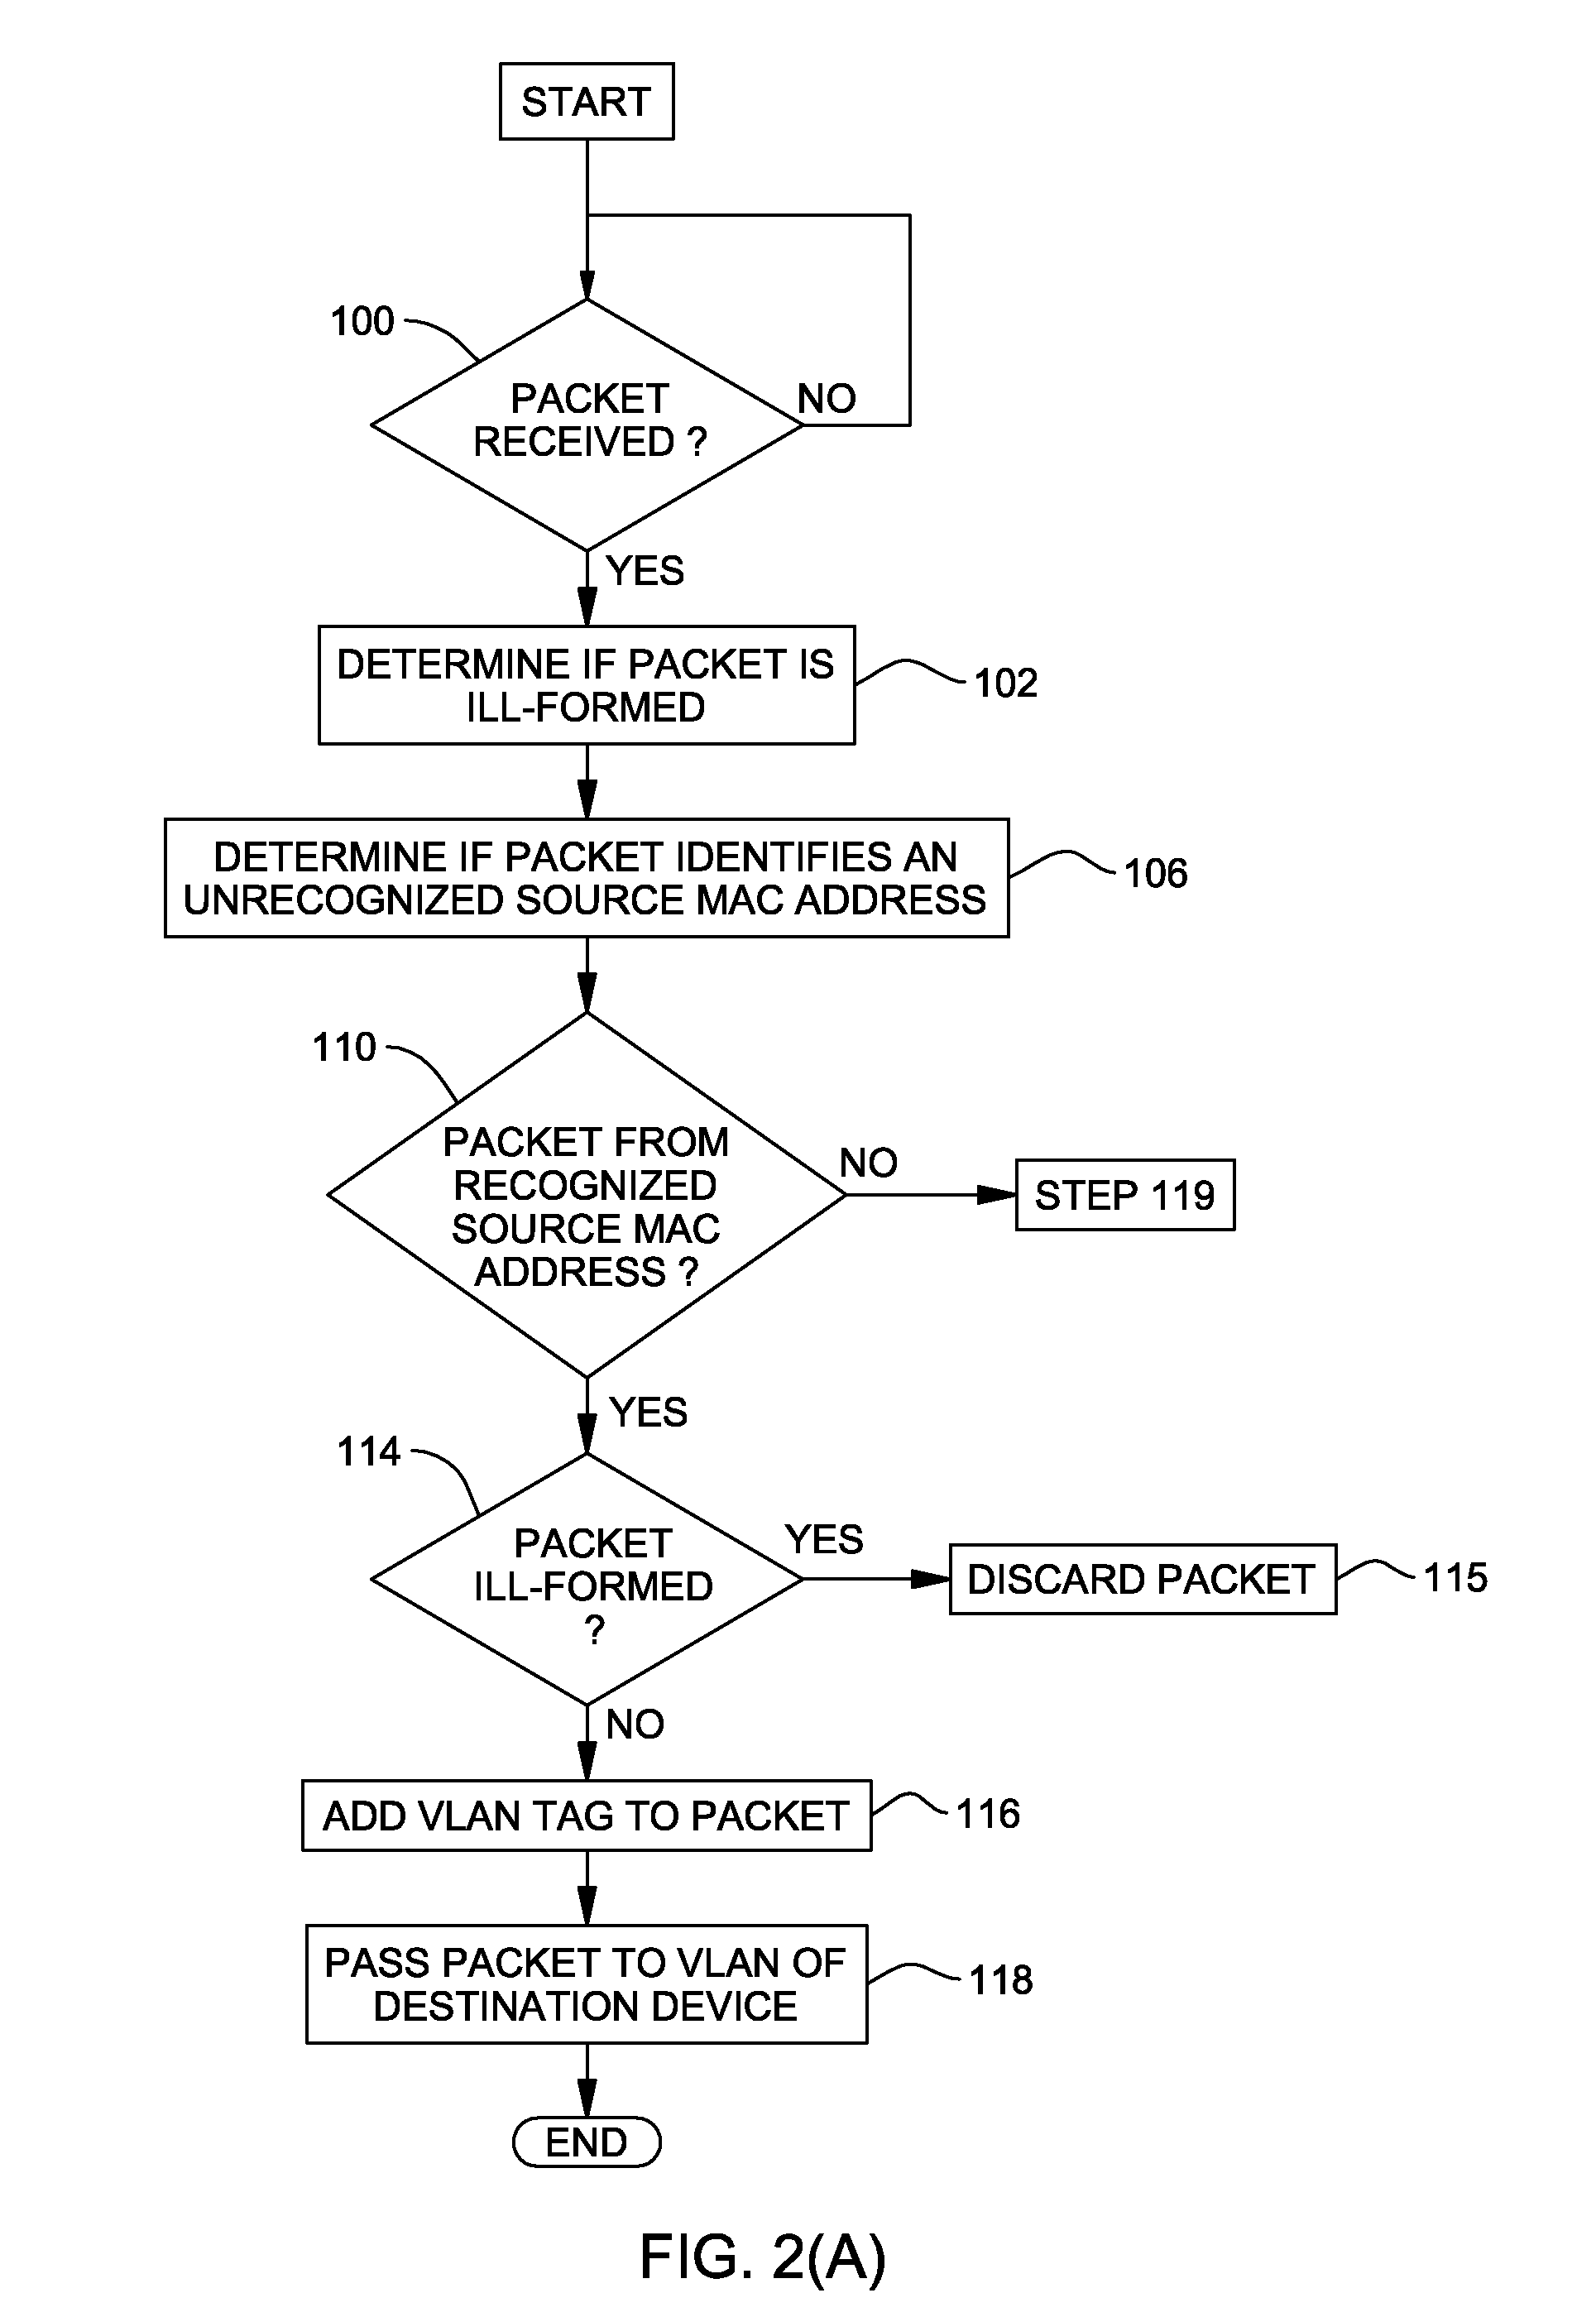 System, method and program to control access to virtual LAN via a switch